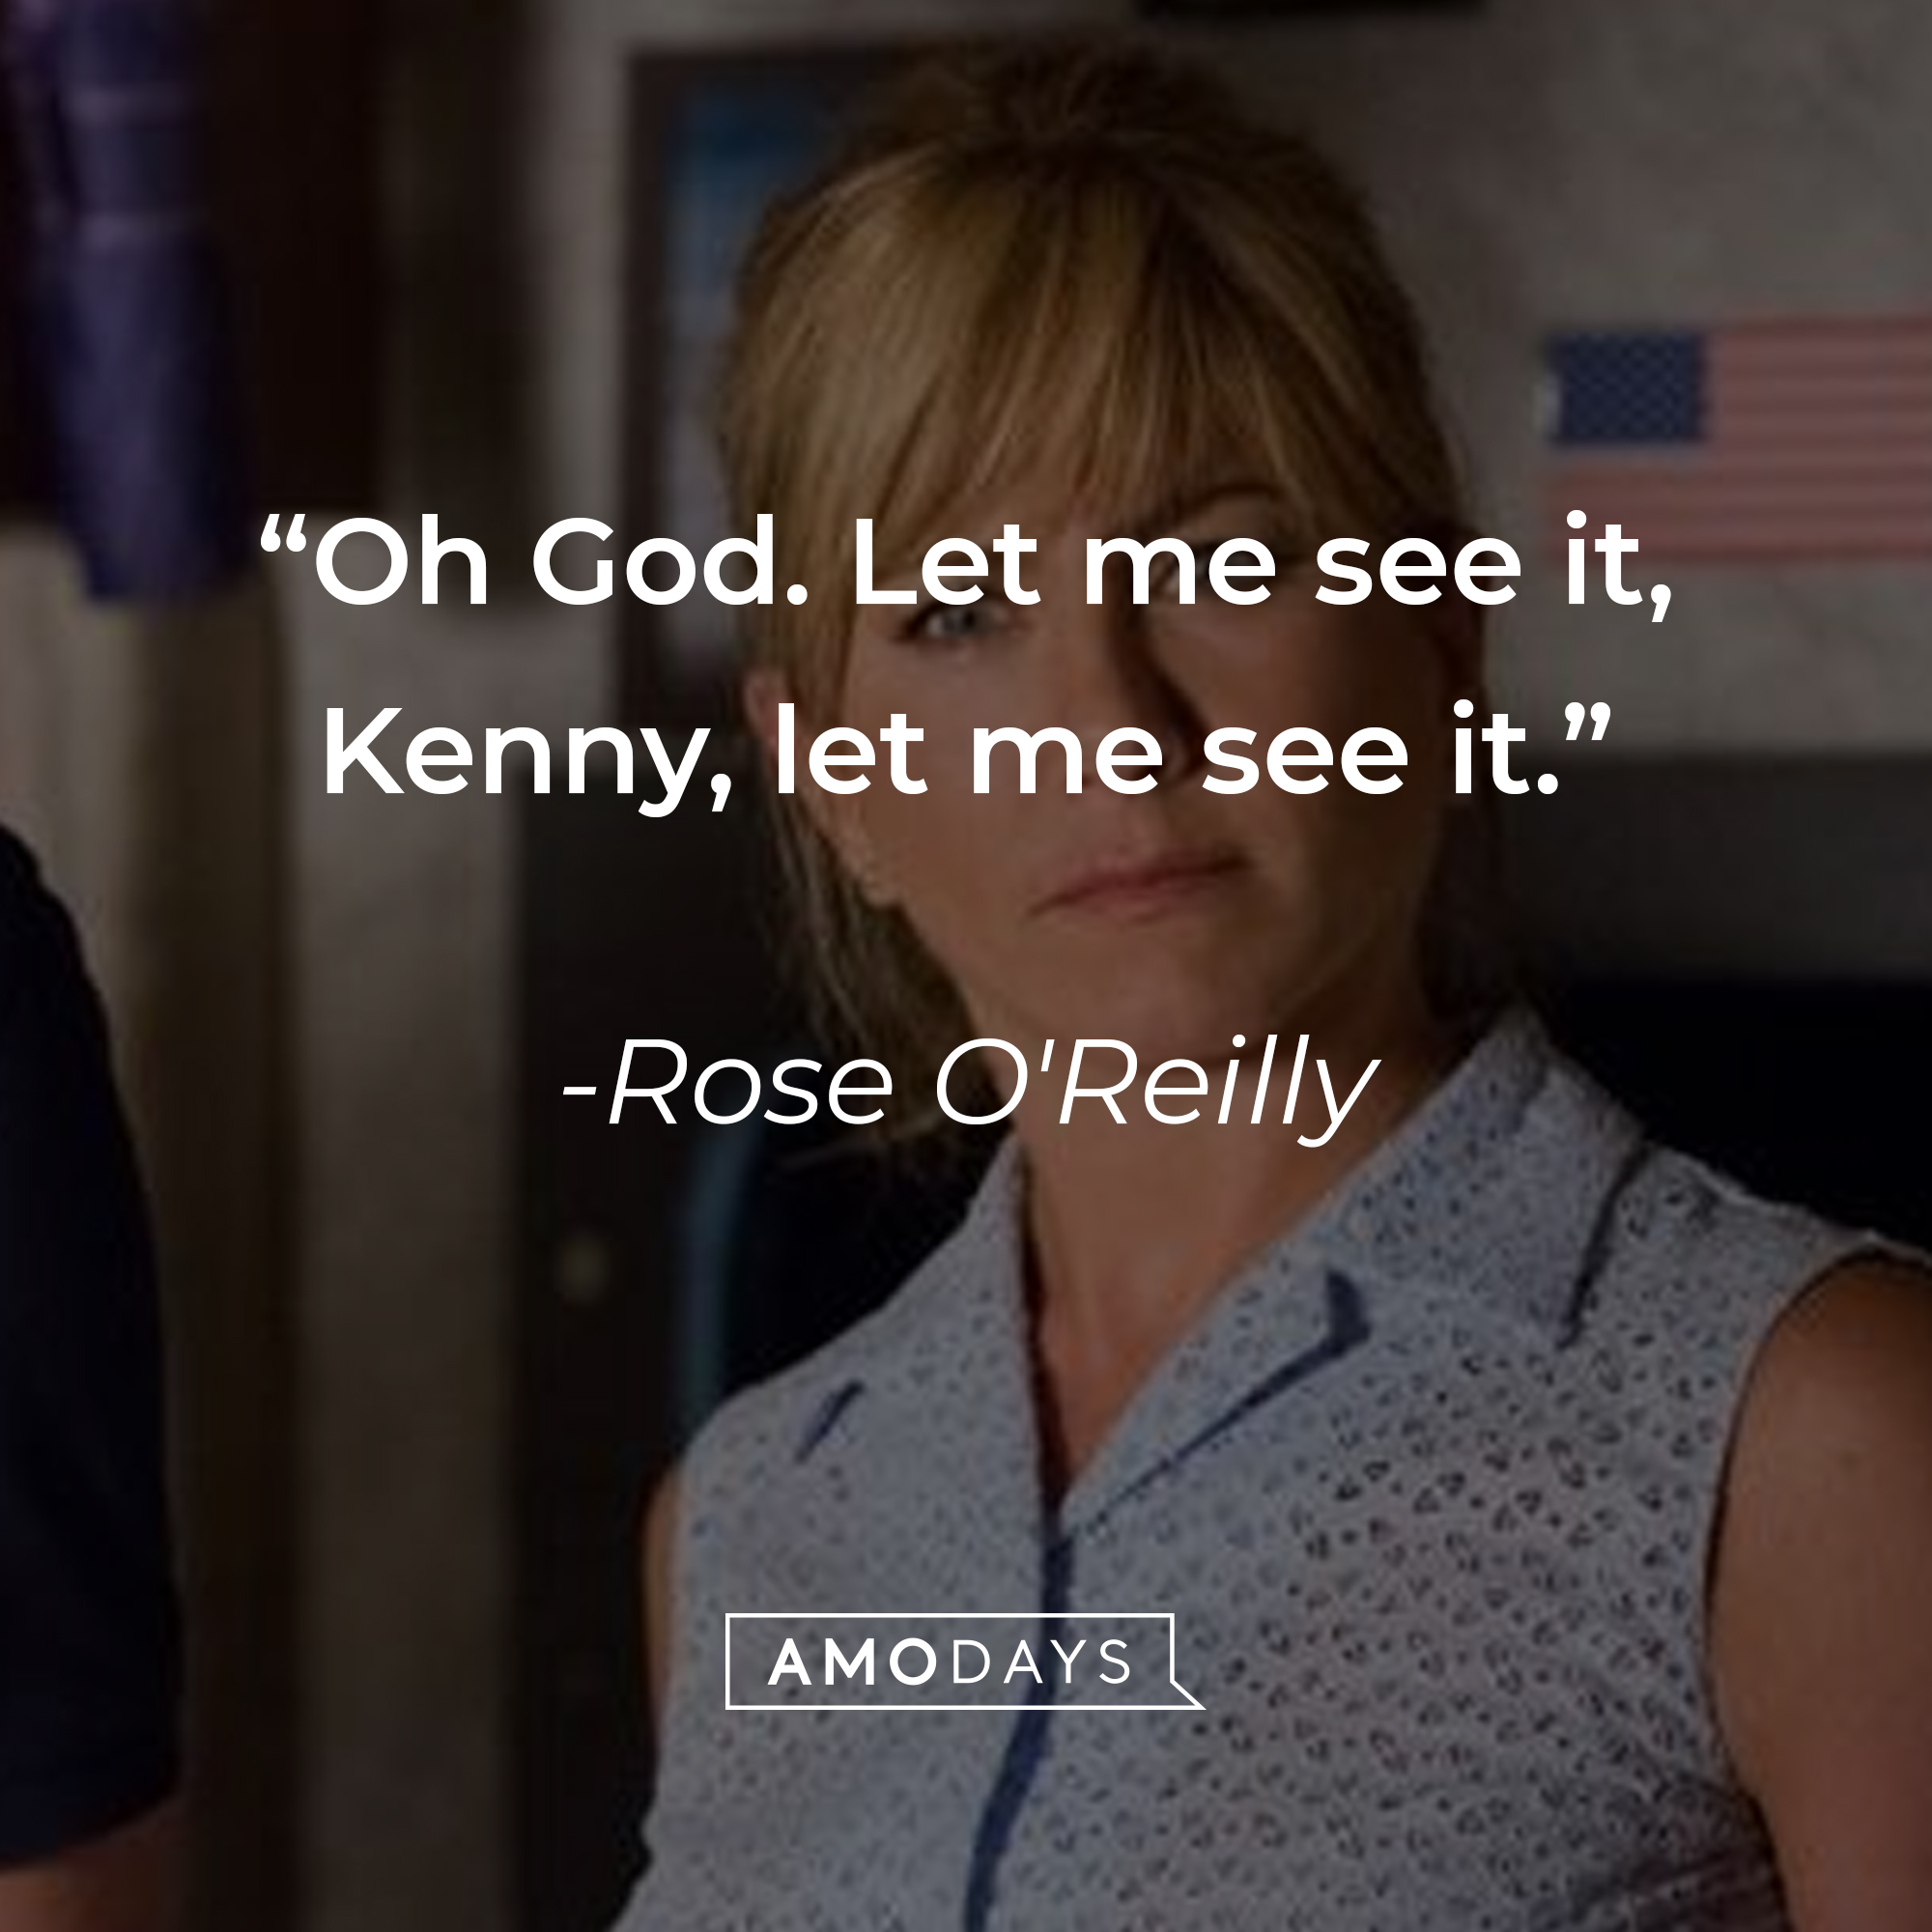 Rose O'Reilly's quote: “Oh God. Let me see it, Kenny, let me see it.” | Source: facebook.com/WereTheMillersUK